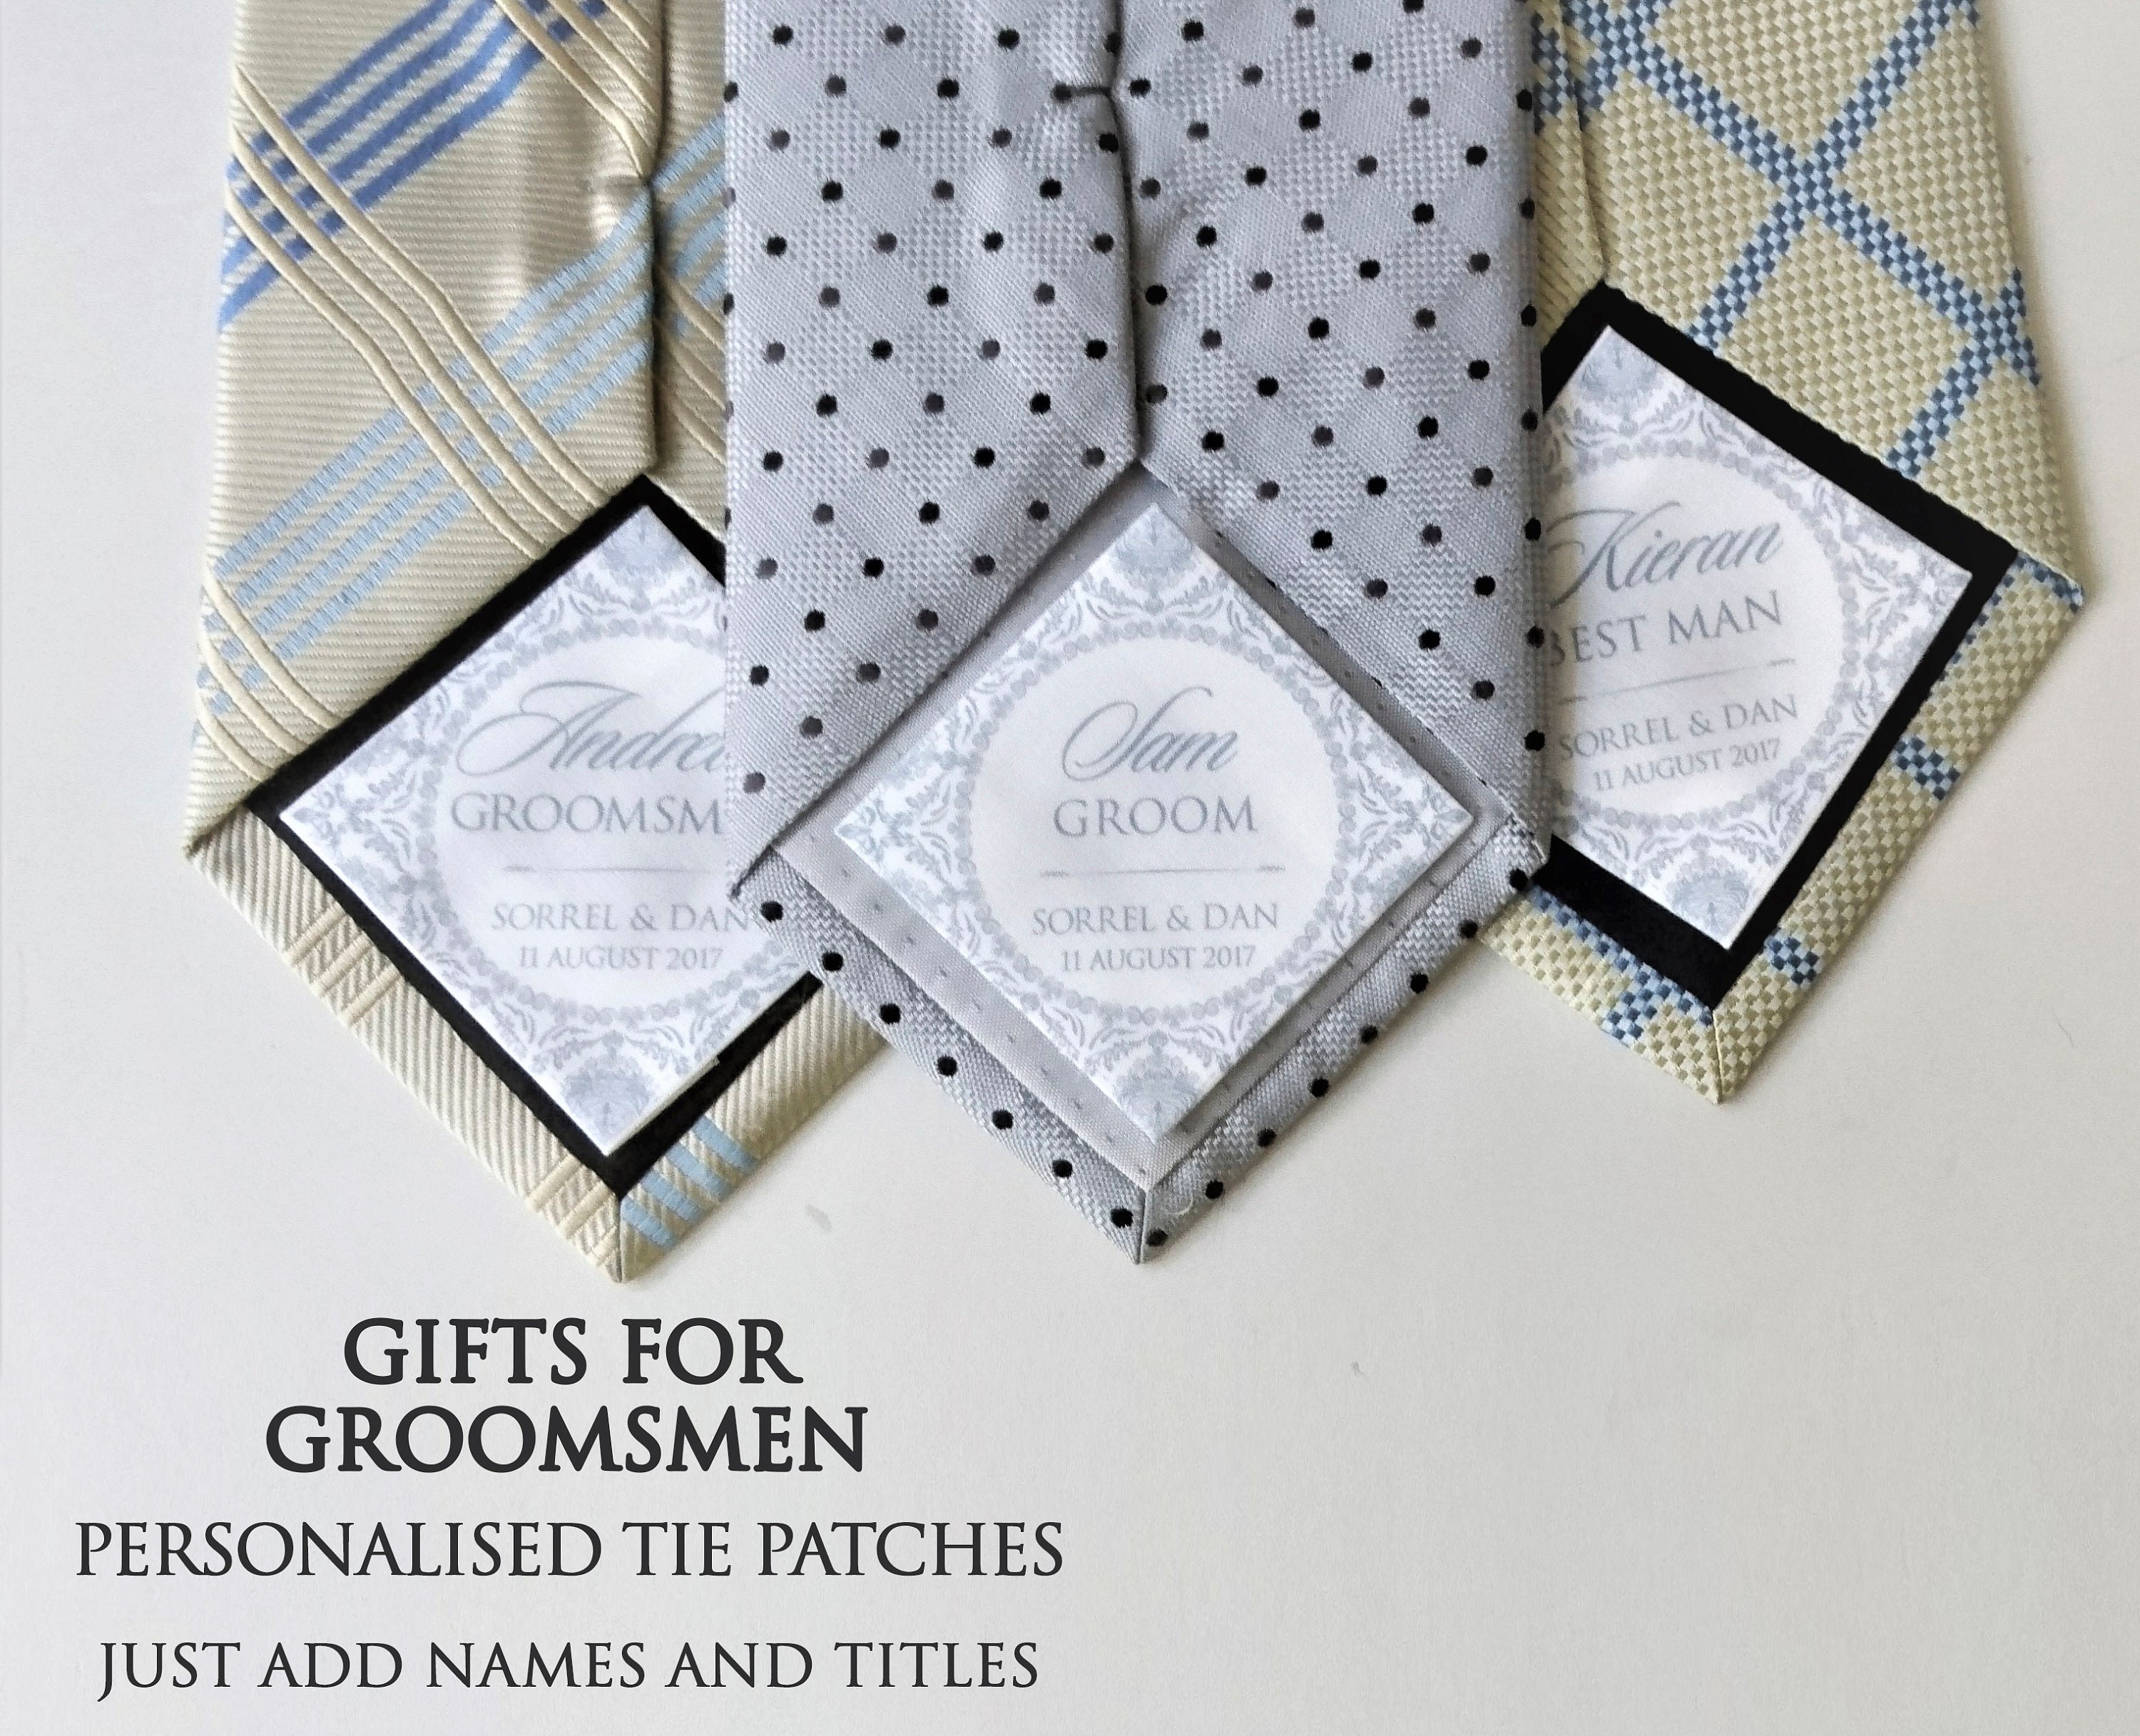 Tie Patches Sets For Your Groomsmen, Gifts Personalised Tie Set Of Ushers